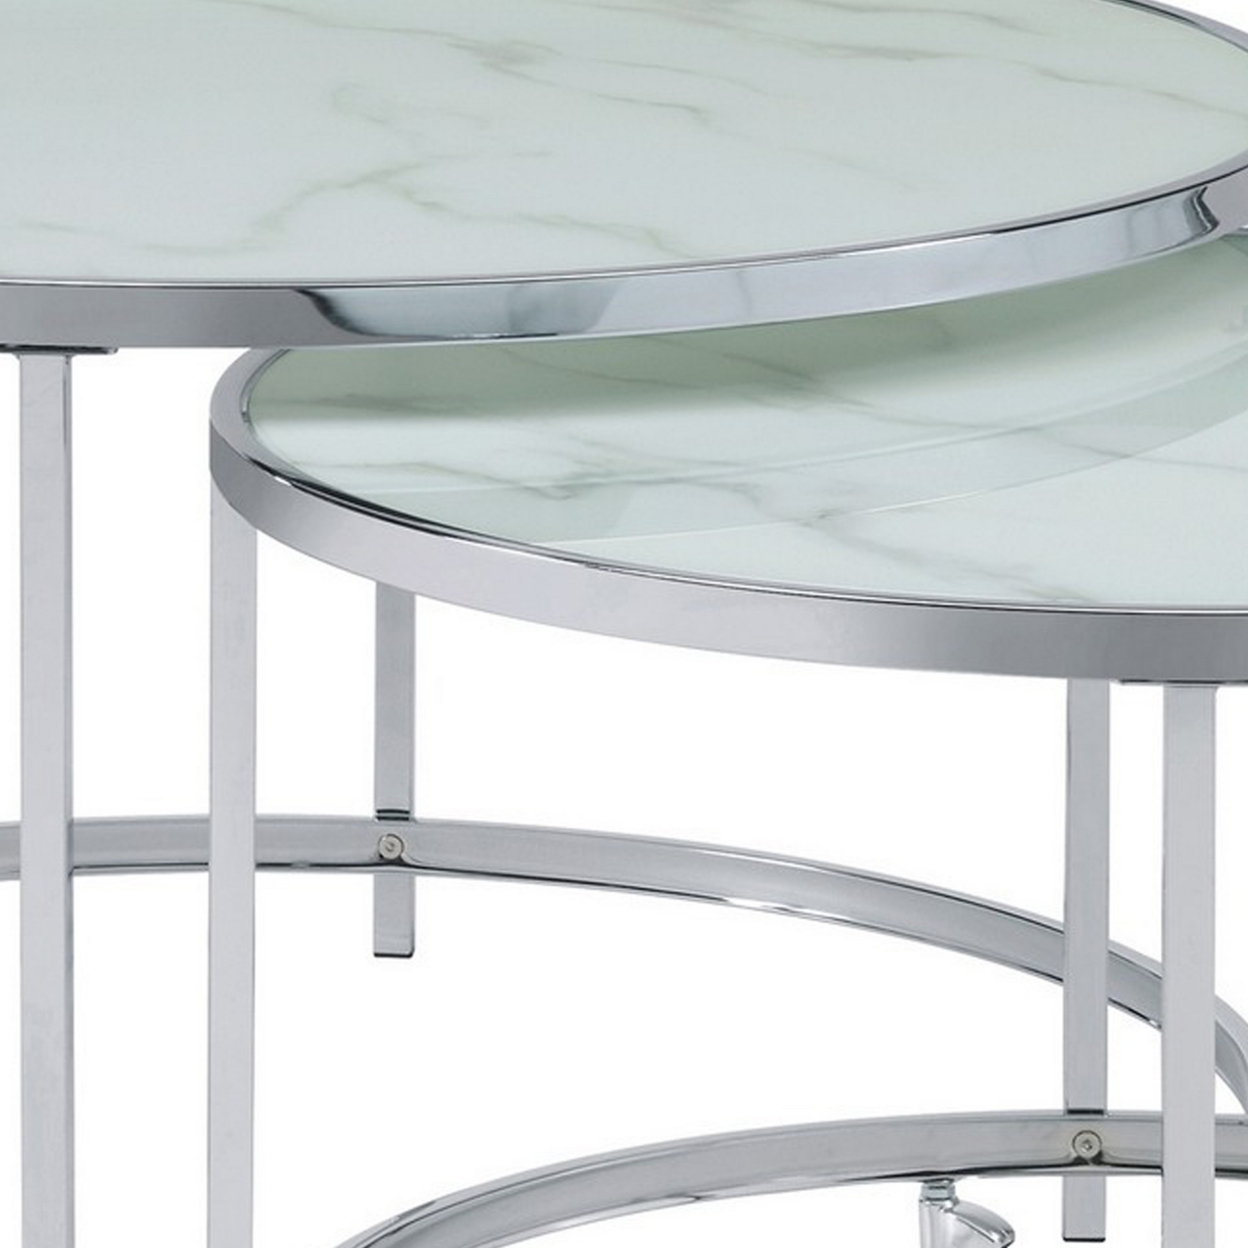 18 Inch Marbled Glass Nesting Accent Tables, Round Top, Metal, Set Of 2